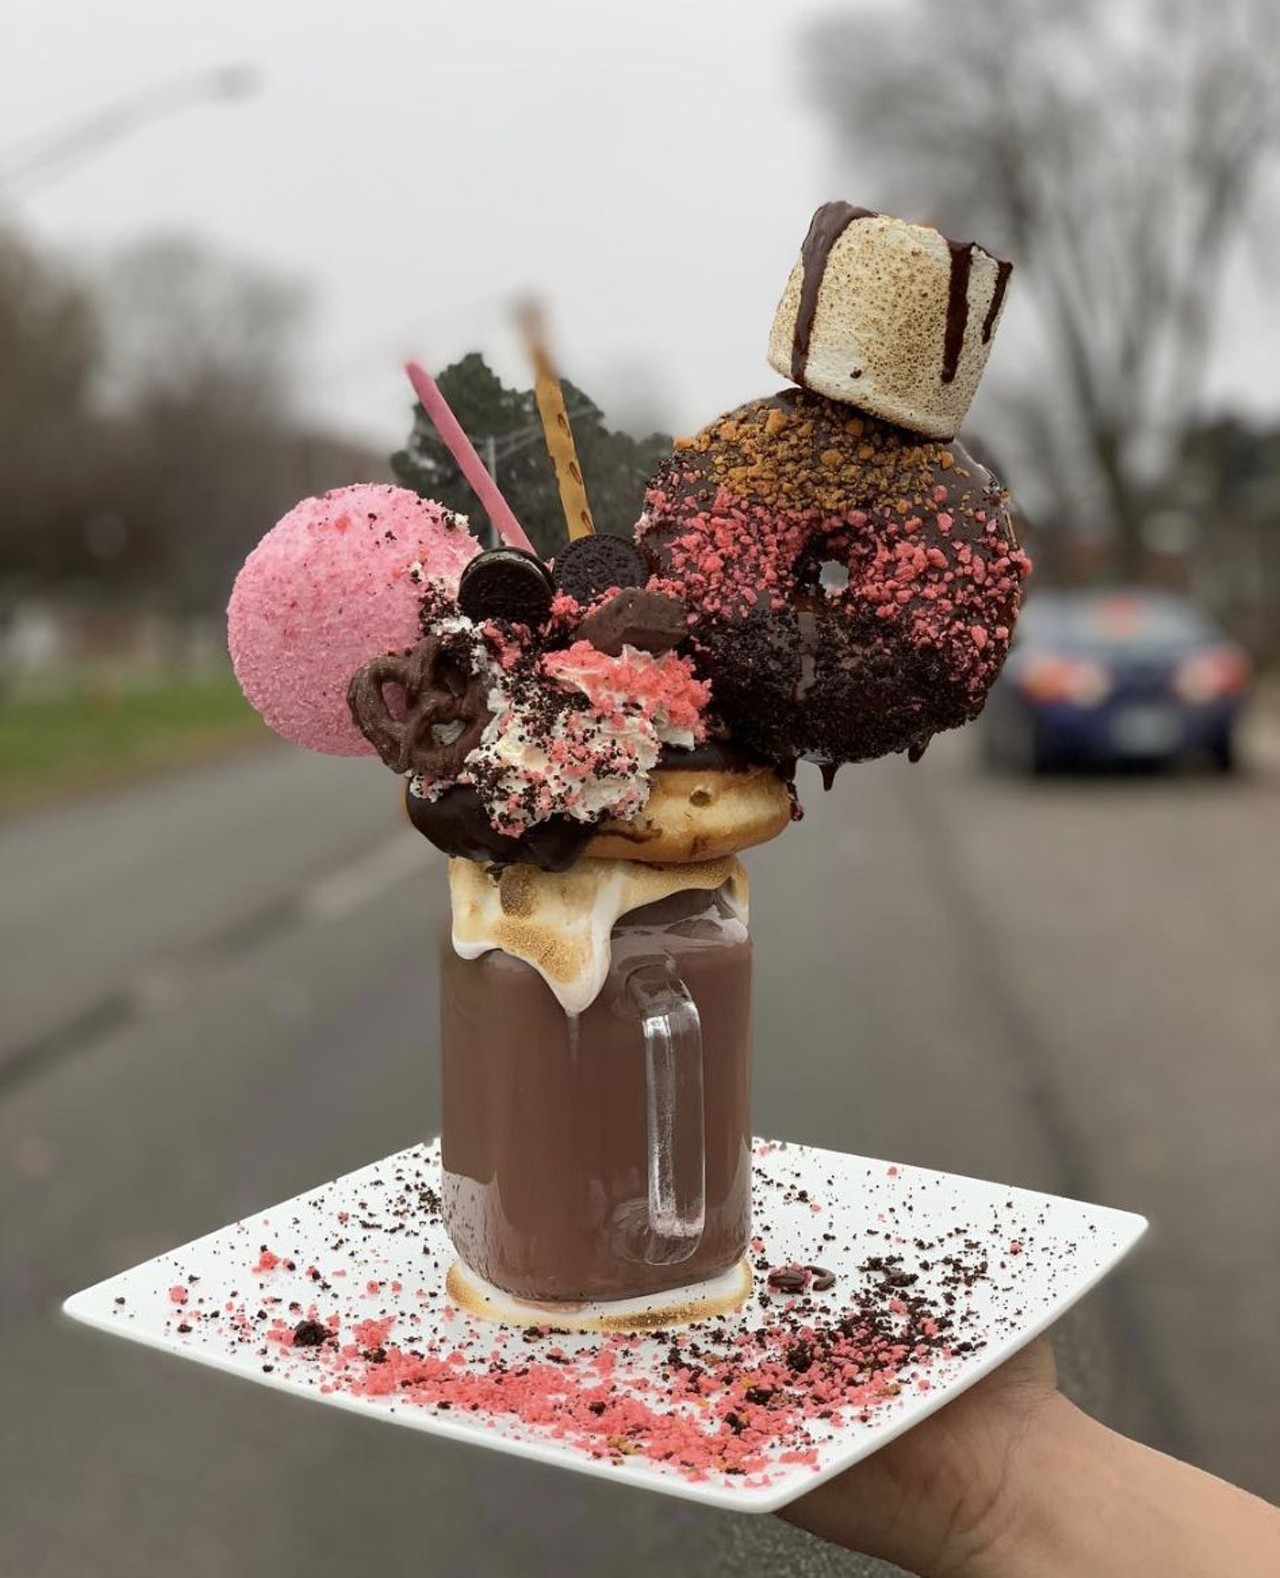 Garrido&#146;s Bistro & Pastry
19605 Mack Ave, Grosse Pointe Woods, MI 48236
Don&#146;t stuff your face too much during dinner if you want to enjoy a treat from Garrido&#146;s this holiday. Their extreme shakes are about five desserts in one.  
Photo with permission from @garridosbistro